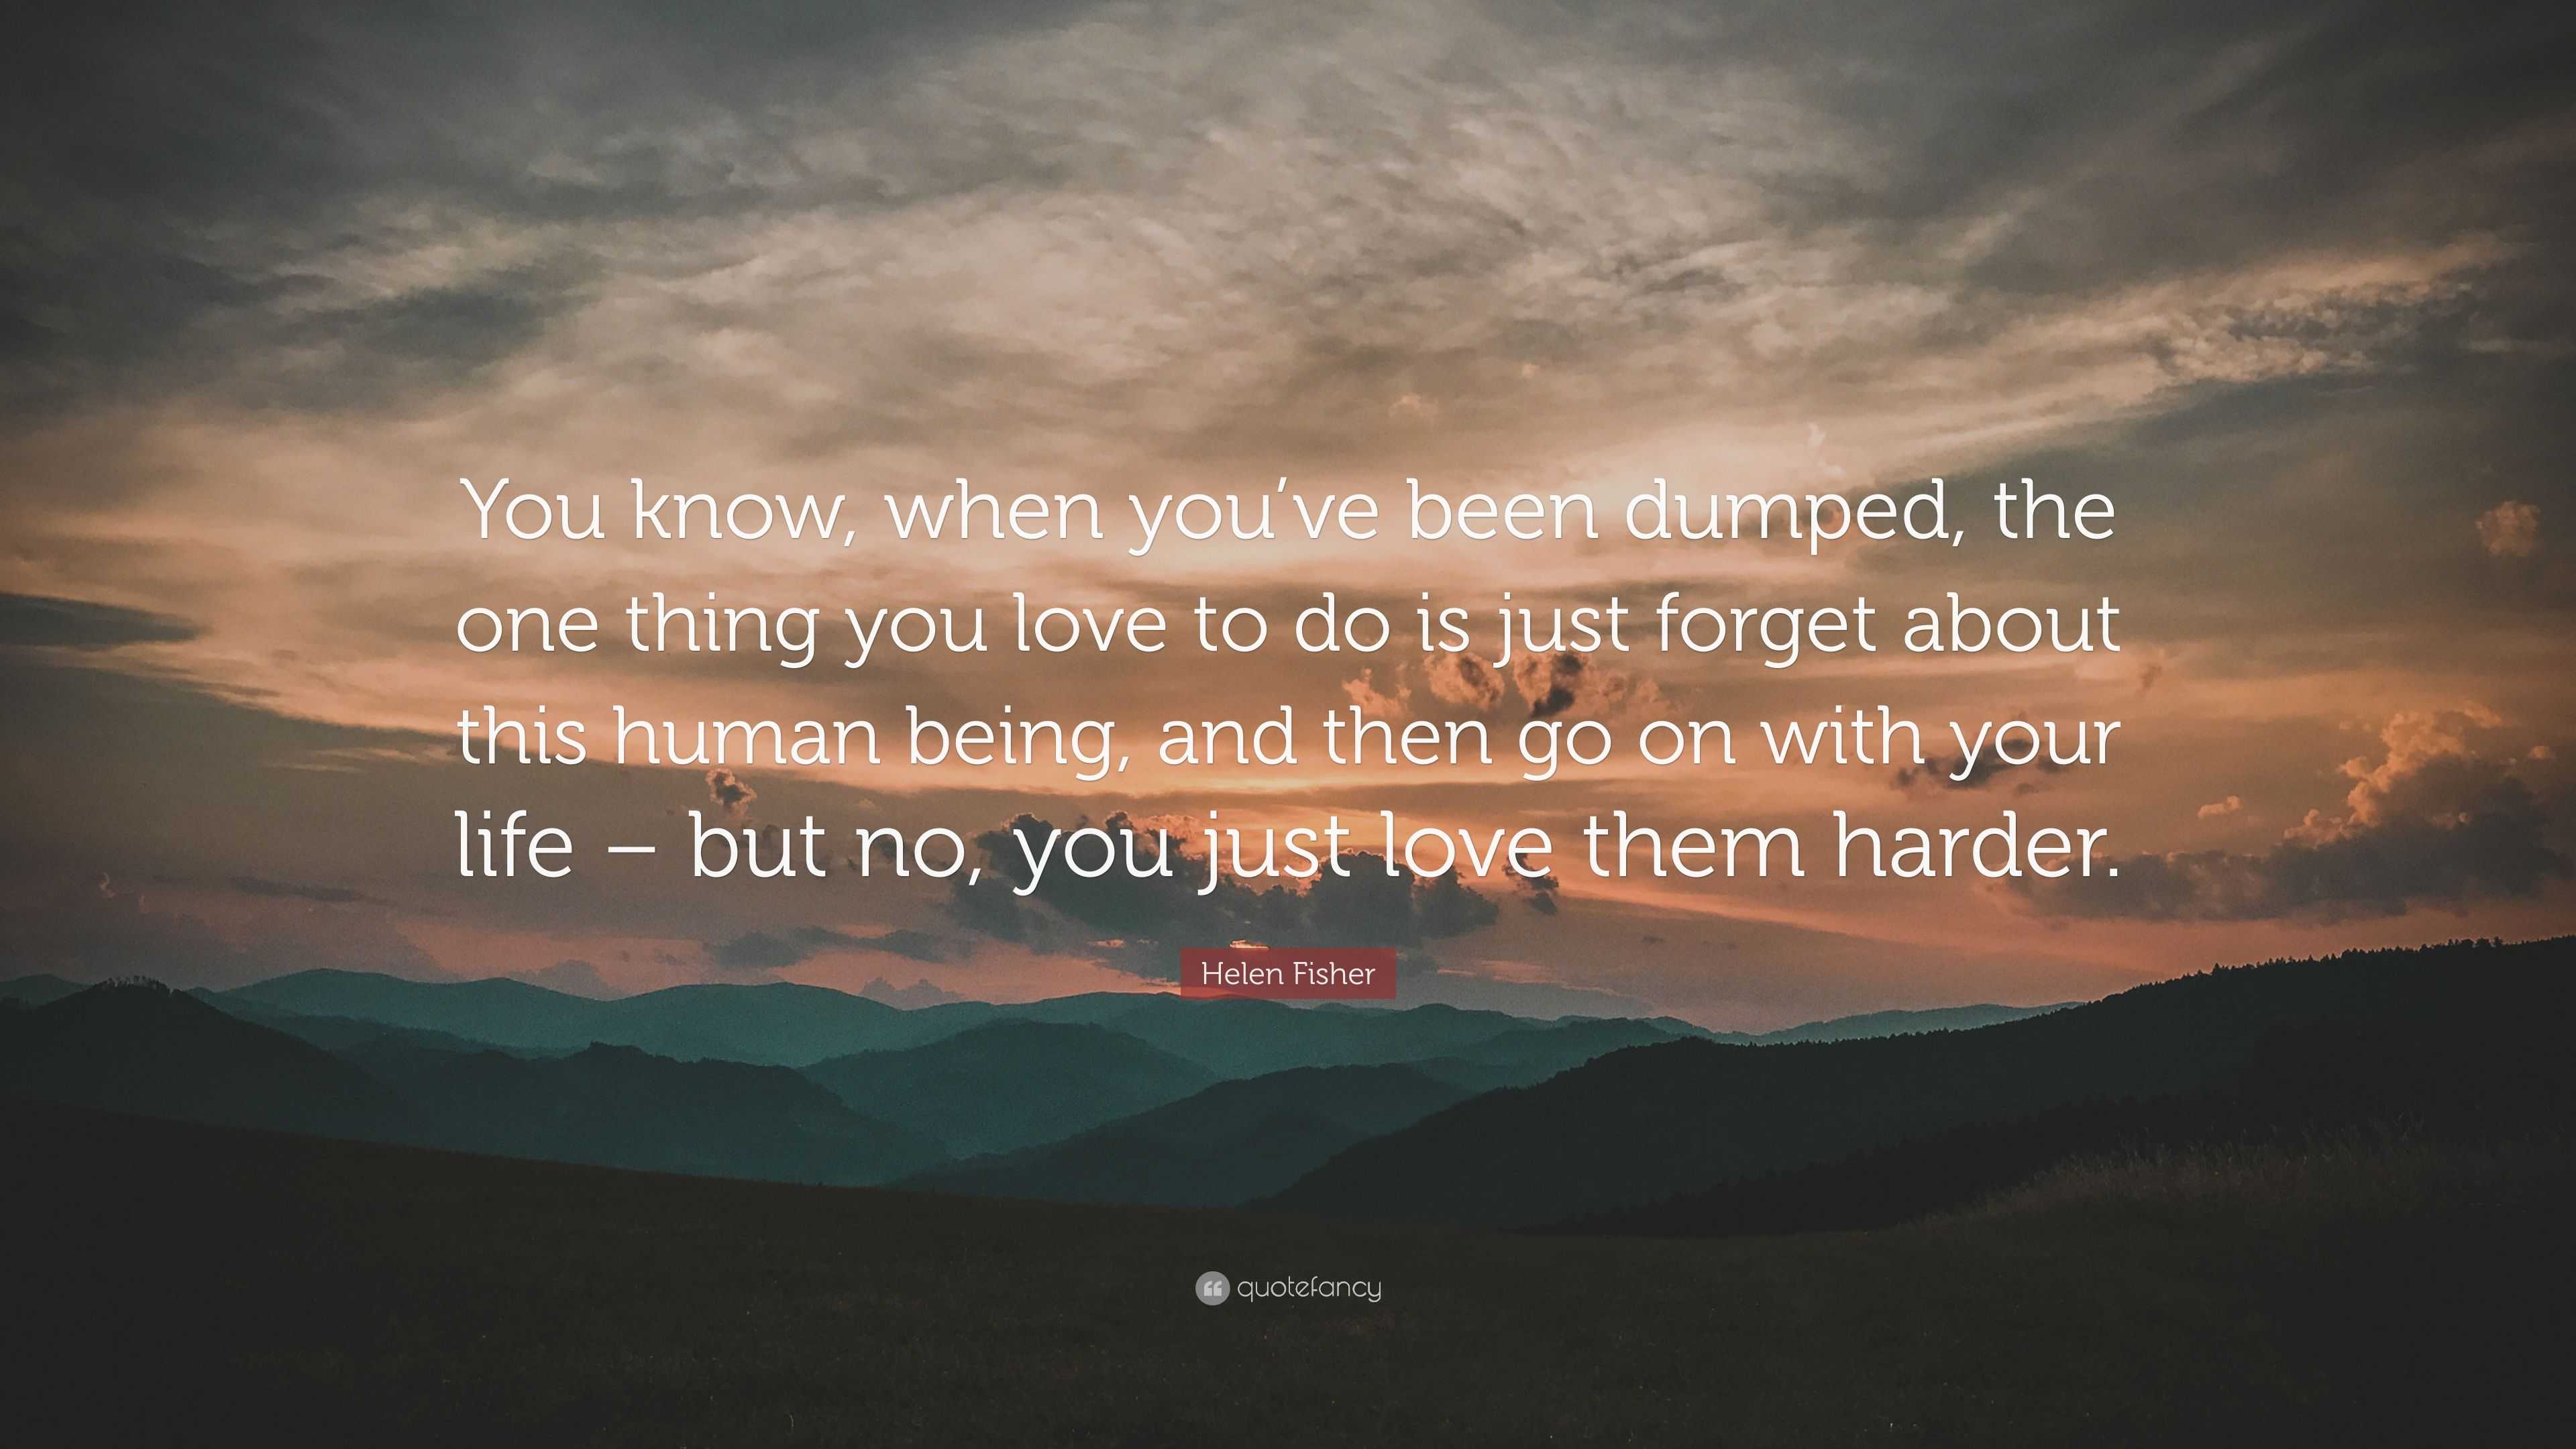 Helen Fisher Quote: “You know, when you’ve been dumped, the one thing ...